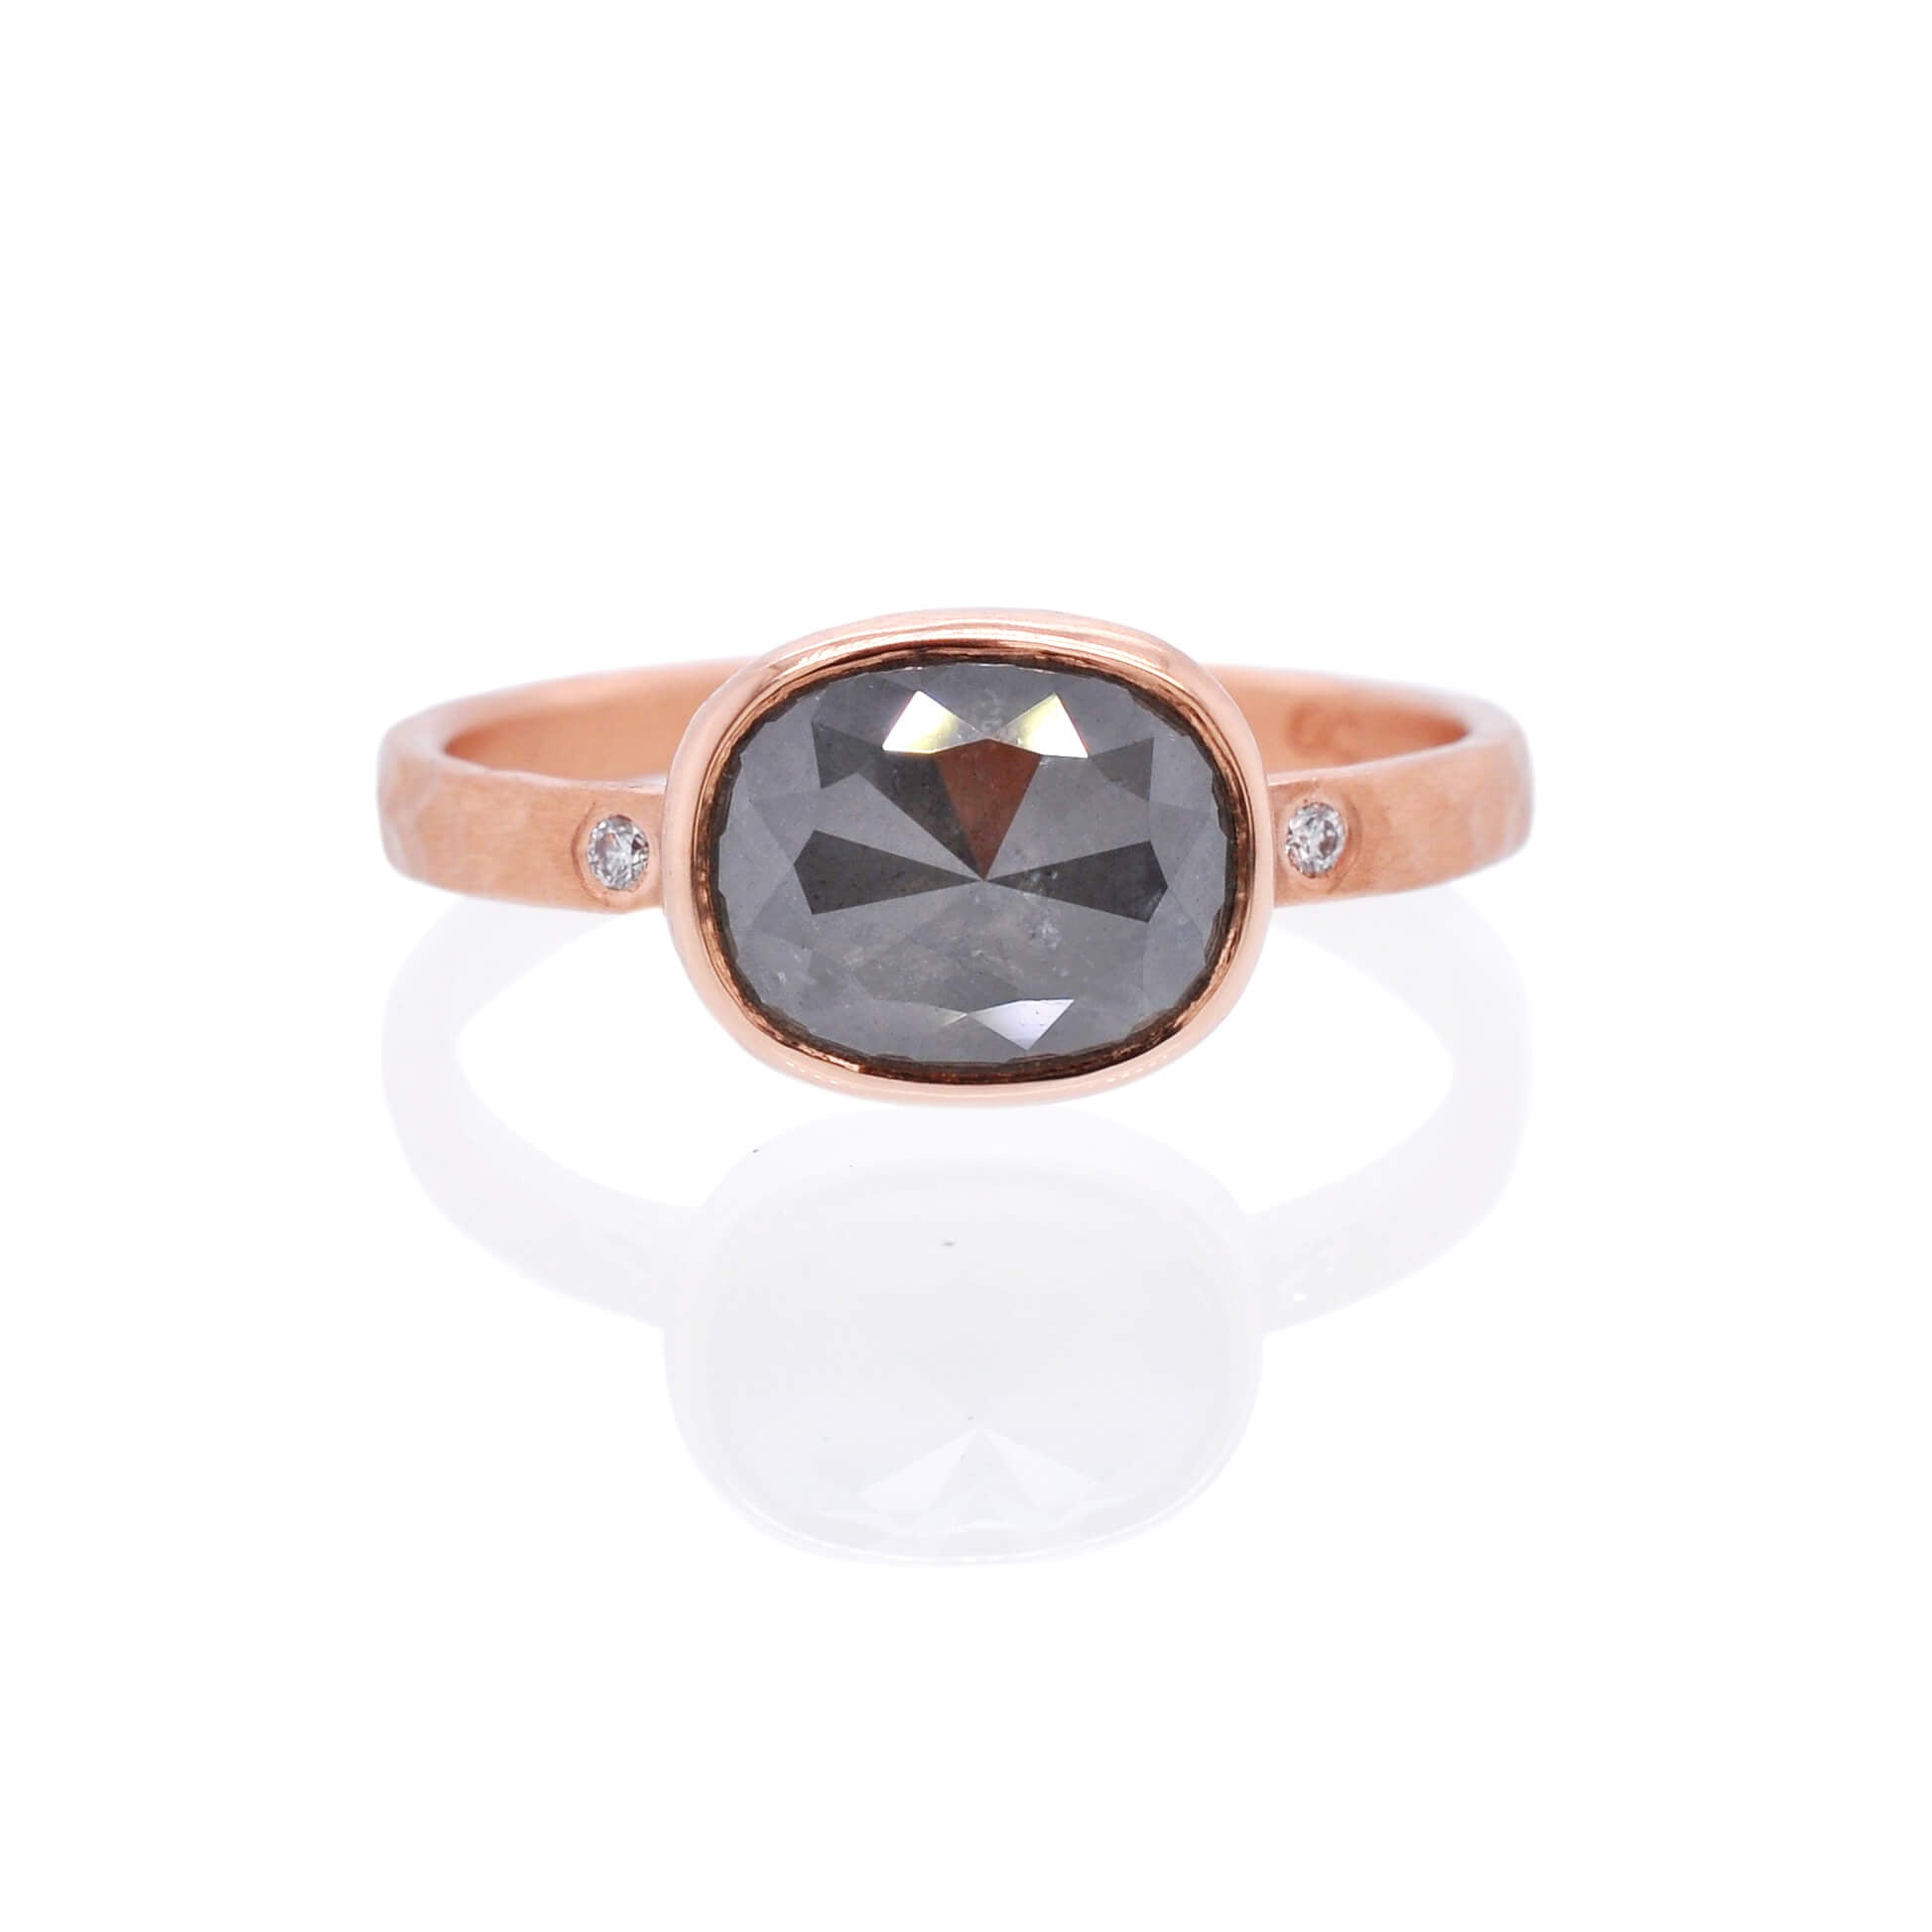 Cushion cut gray diamond in hammered rose gold with flush set diamond accents. Handmade by EC Design Jewelry in Minneapolis, MN using recycled metal and conflict-free stones.